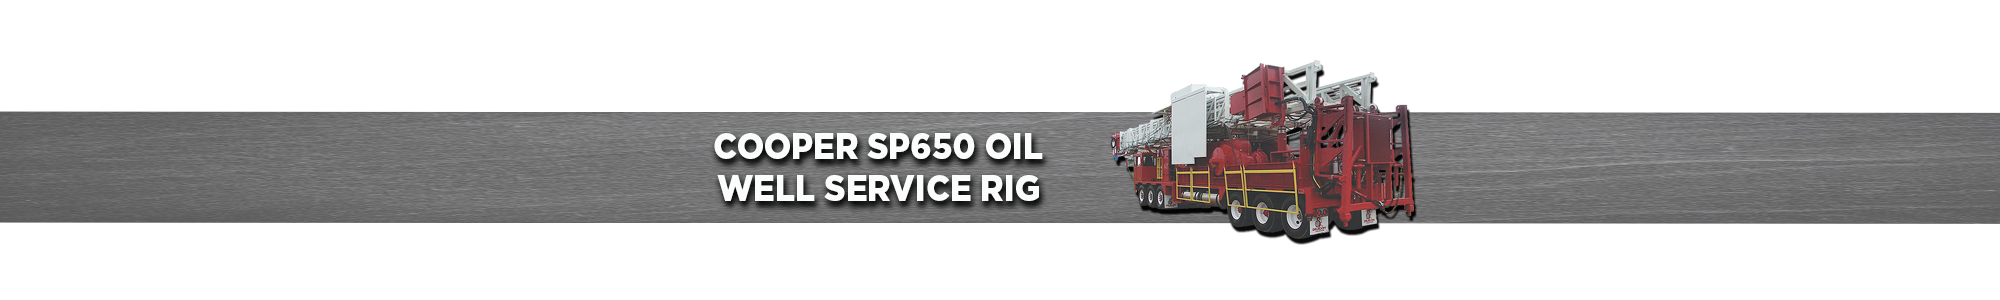 Cooper SP650 Oil Well Service Rig